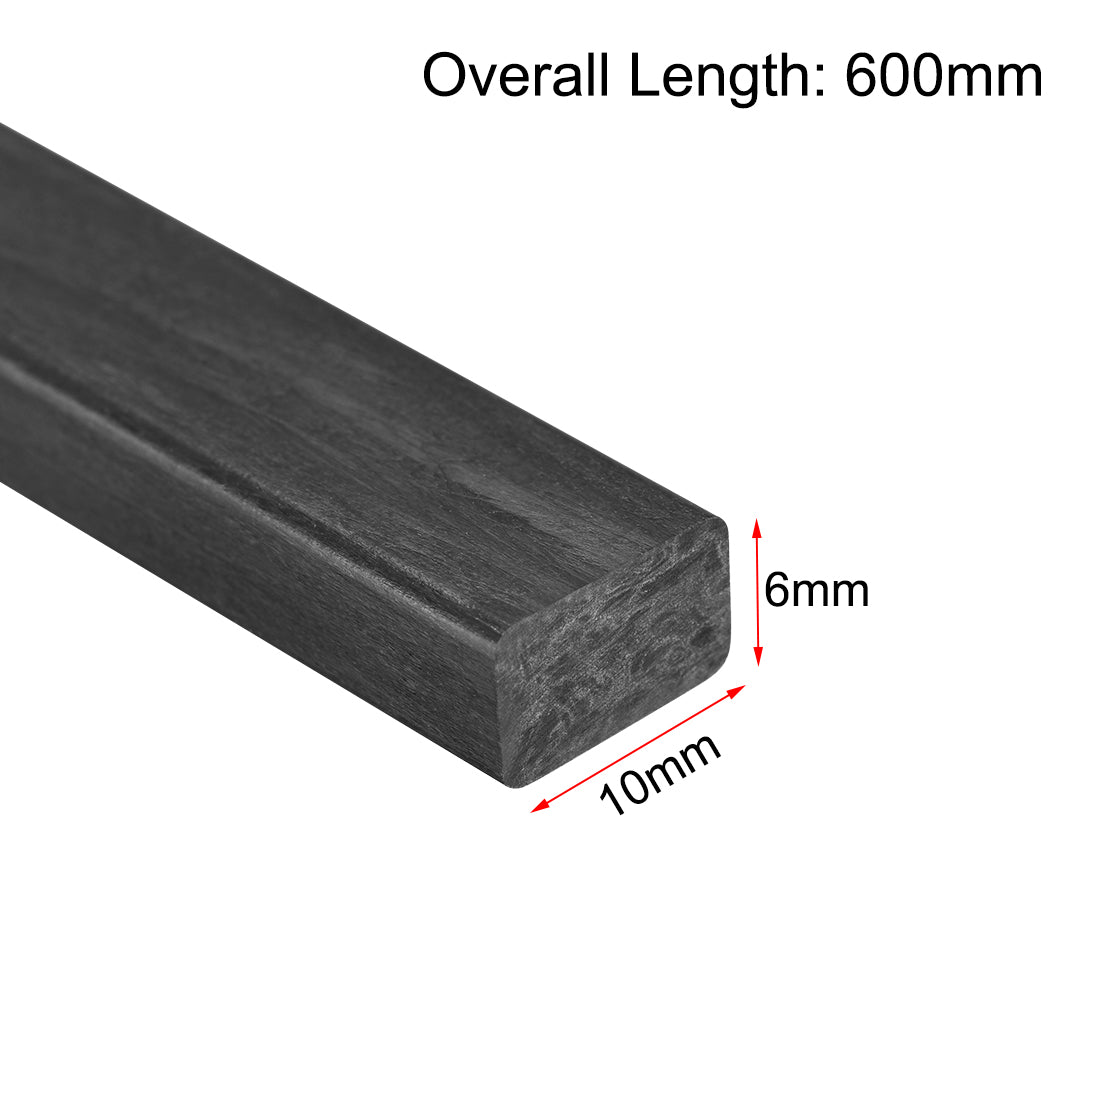 uxcell Uxcell Carbon Fiber Strip Bars 6x10mm 600mm Length Pultruded Carbon Fiber Strips for Kites, RC Airplane 1 Pcs